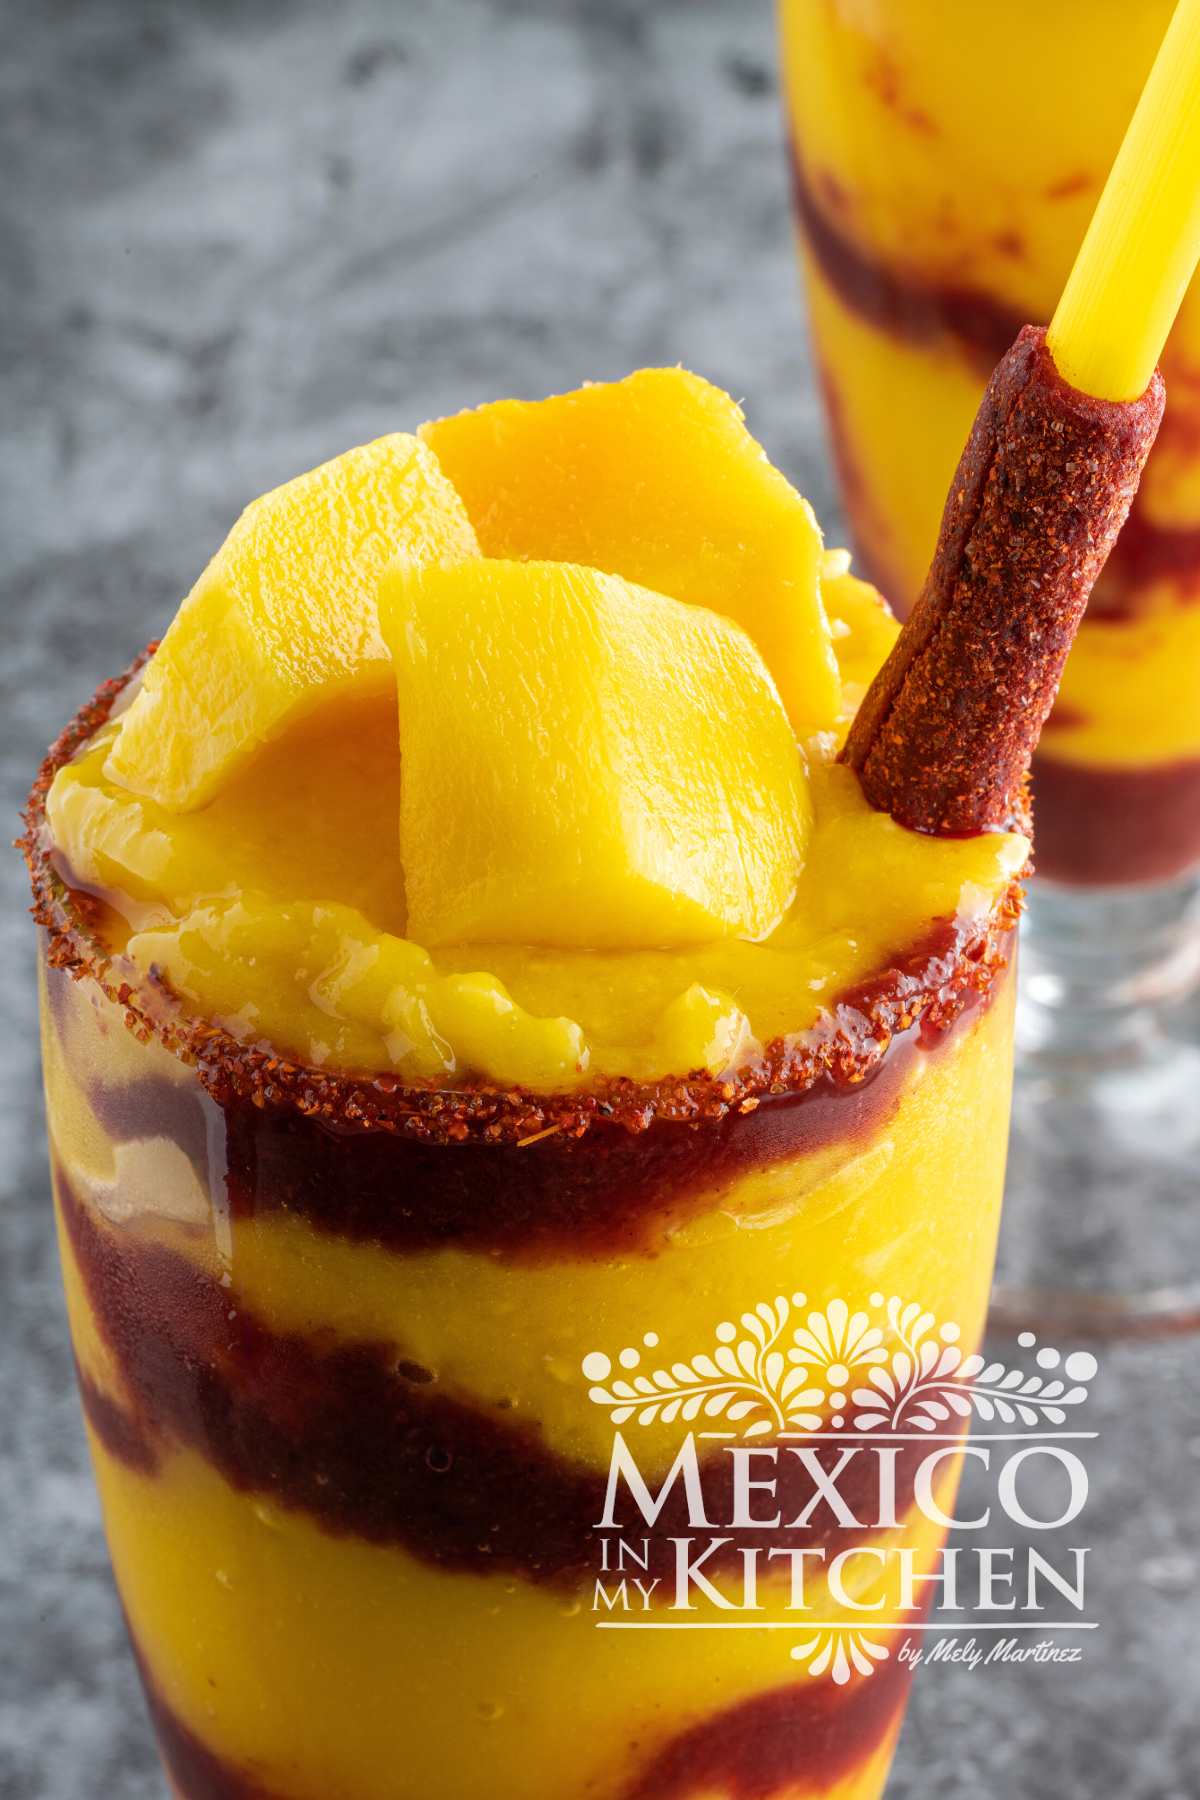 Mangonada served in a tall glass mixed with Chamoy Sauce and garnished with more mango and a tamarind stick.